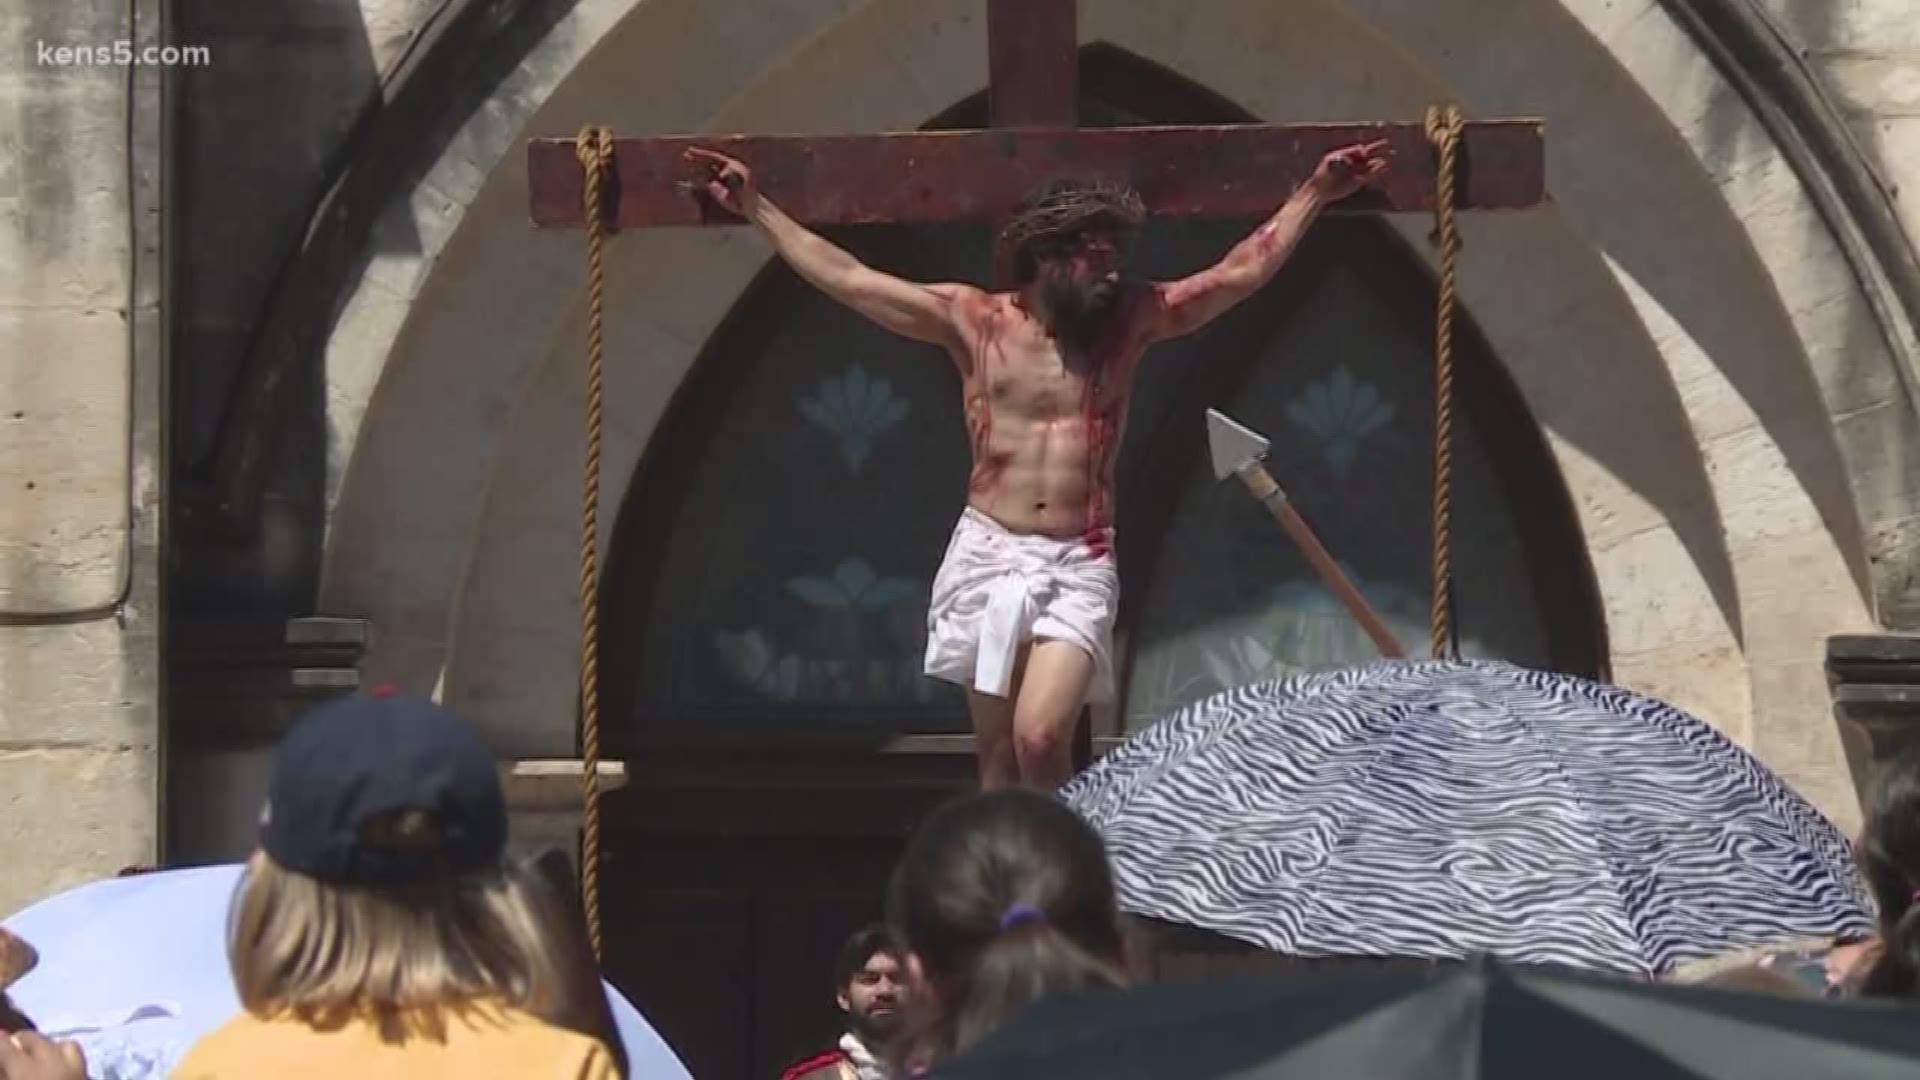 It is a San Antonio tradition that draws thousands of Christians downtown to share and profess their faith. The annual Good Friday Passion of the Christ re-enactment filled the streets surrounding the heart of town Friday.